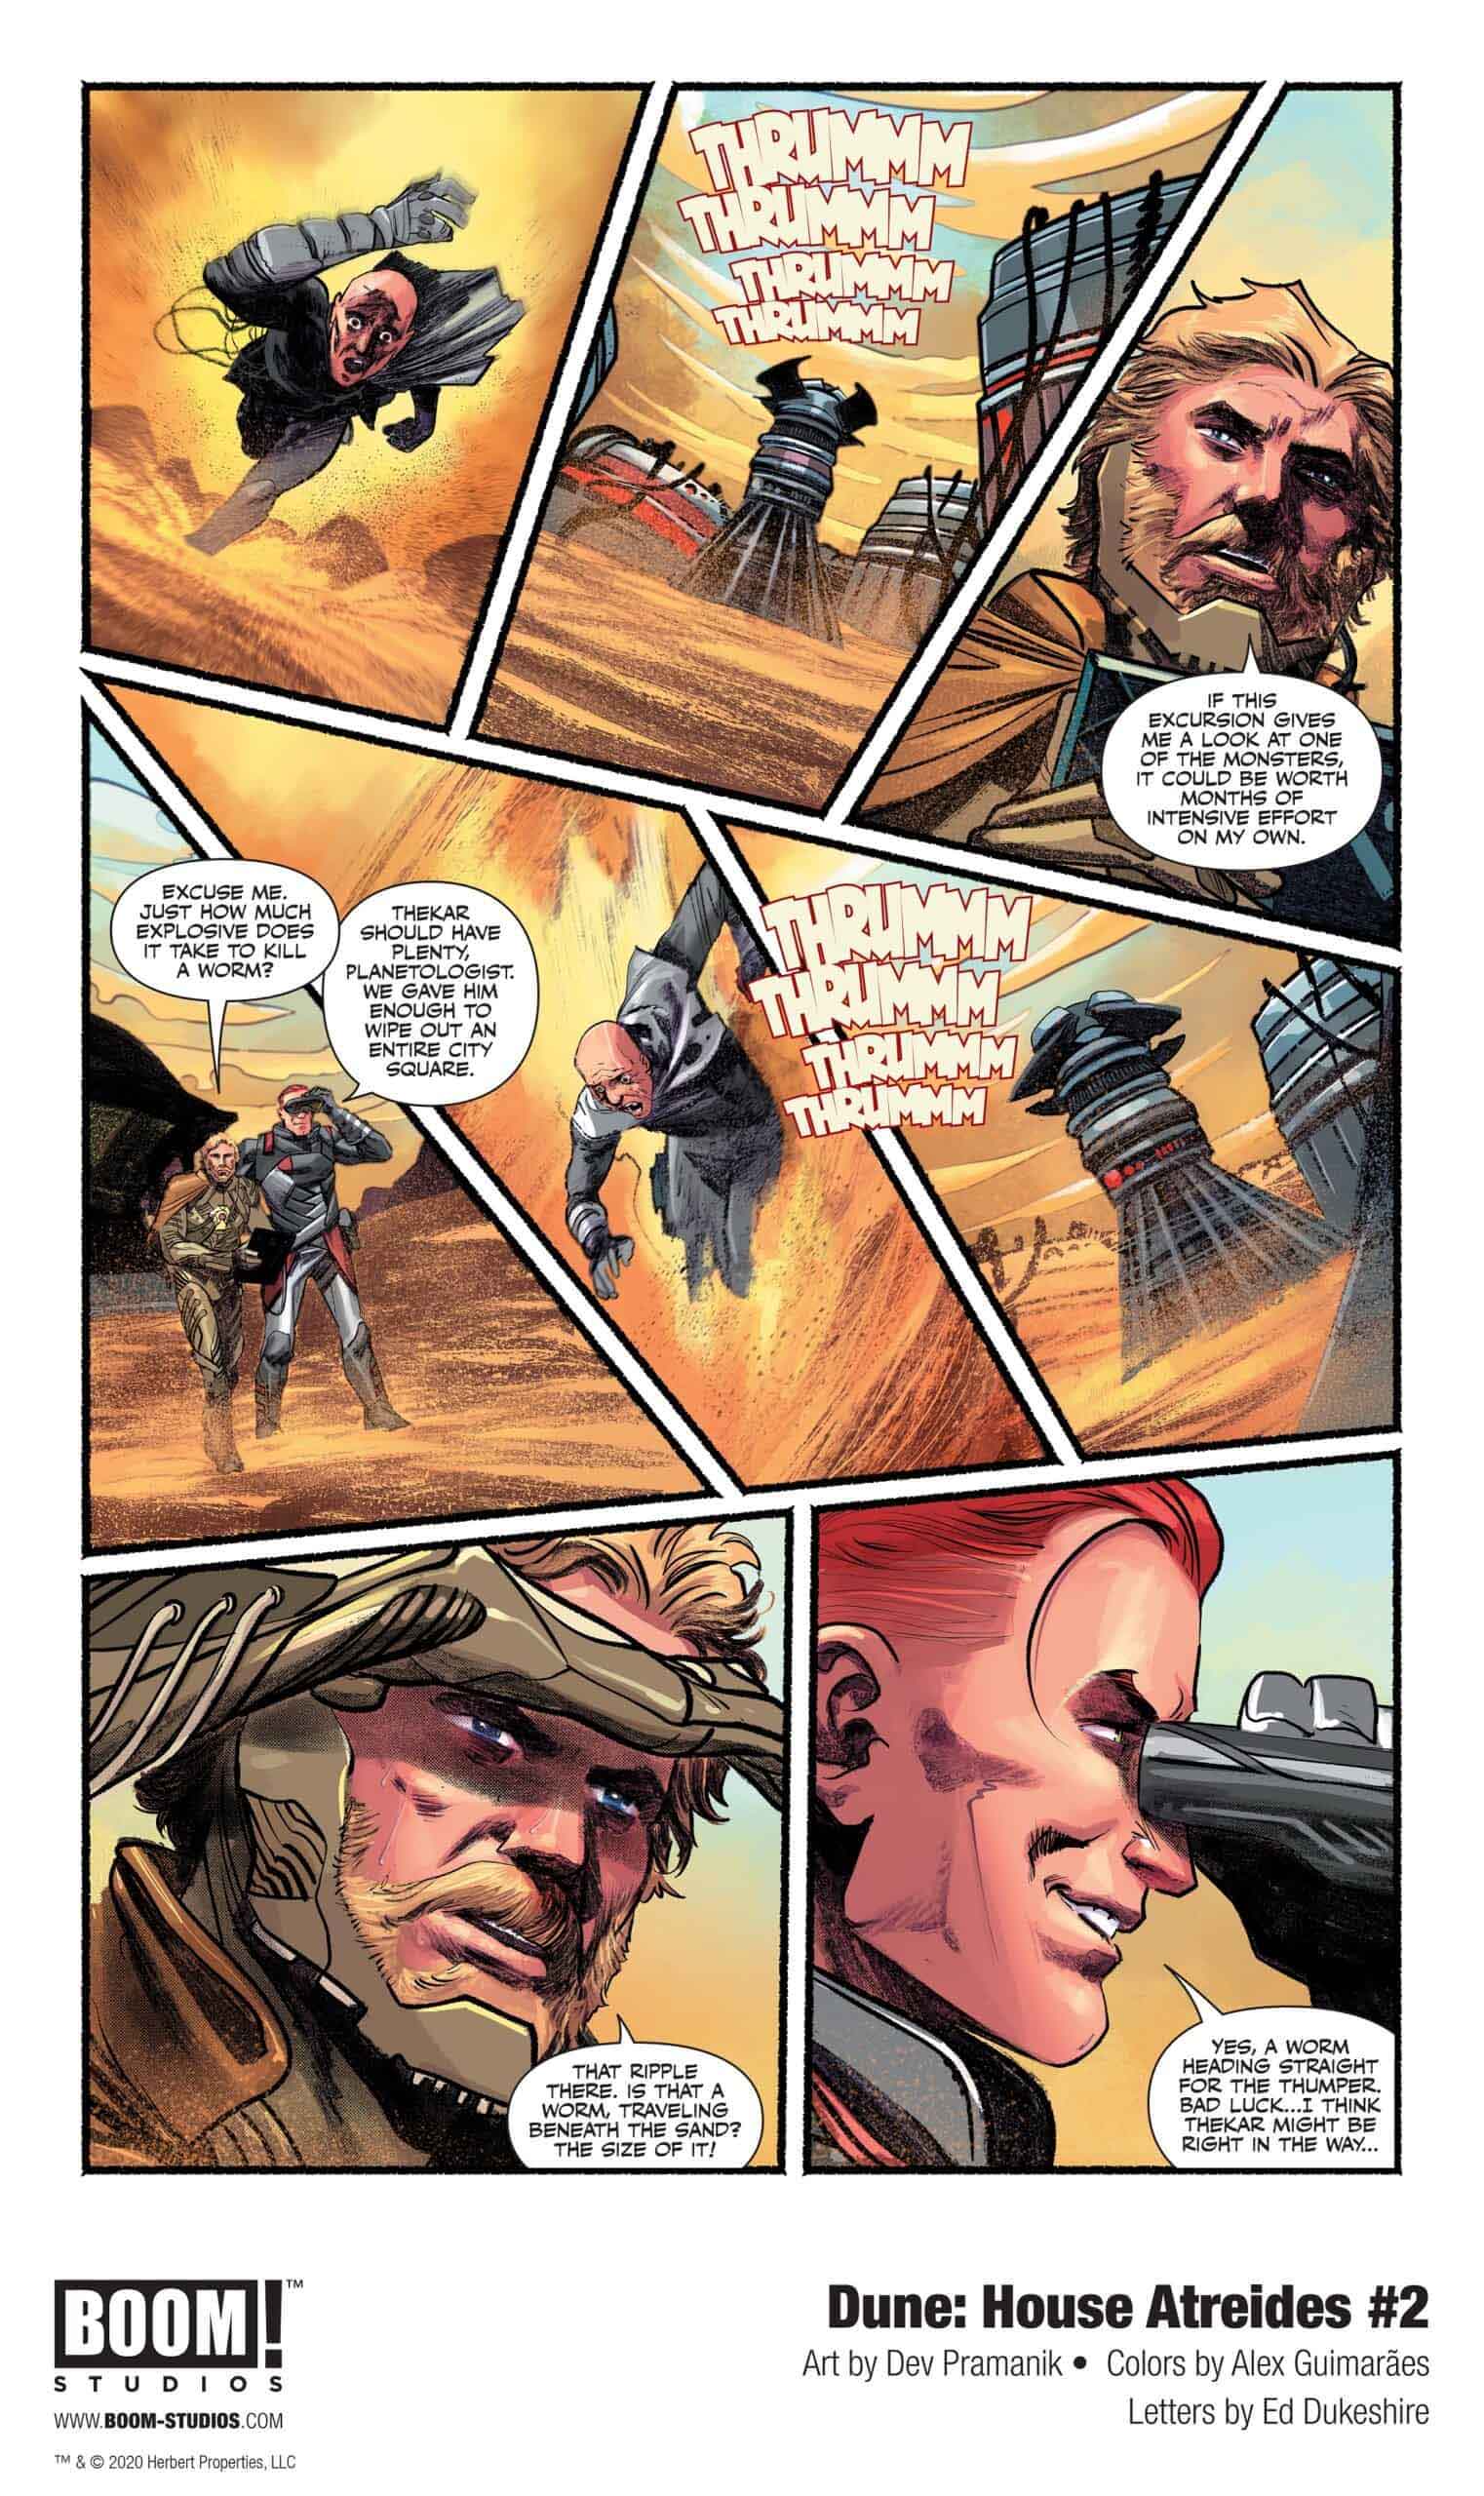 Dune: House Atreides comic series. Issue #2, preview page 5.